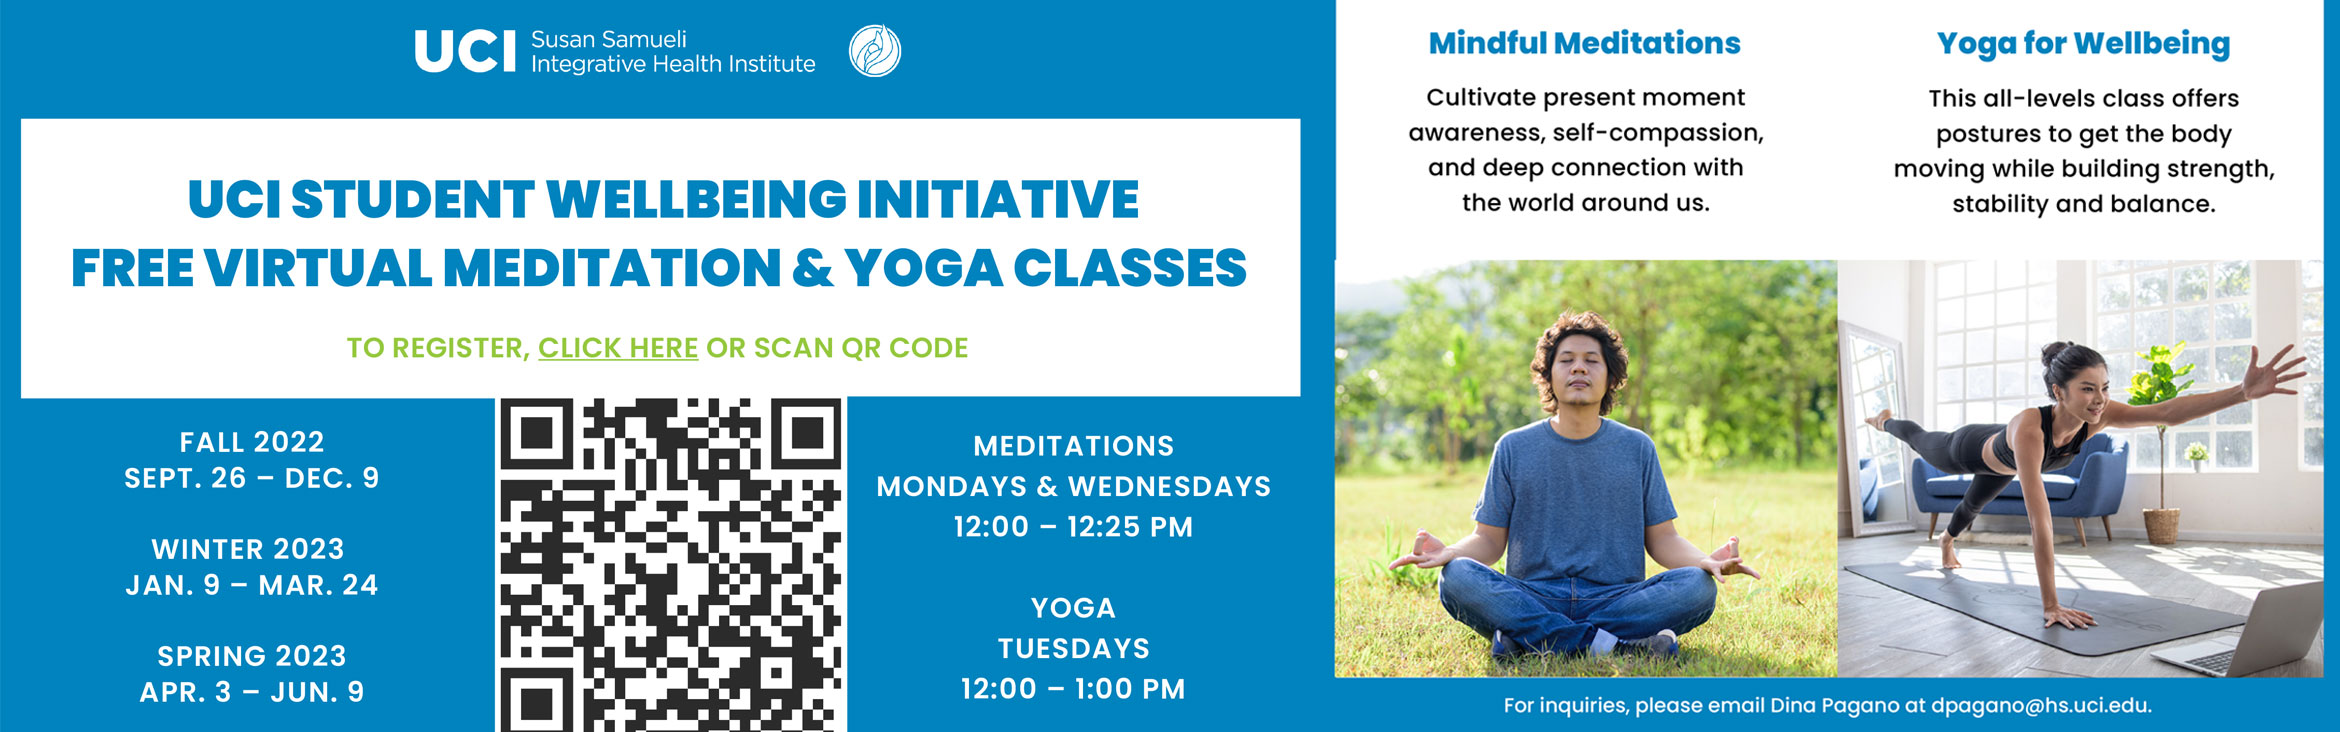 UCI Student Wellbeing Initiative Free Meditation and Yoga Classes 